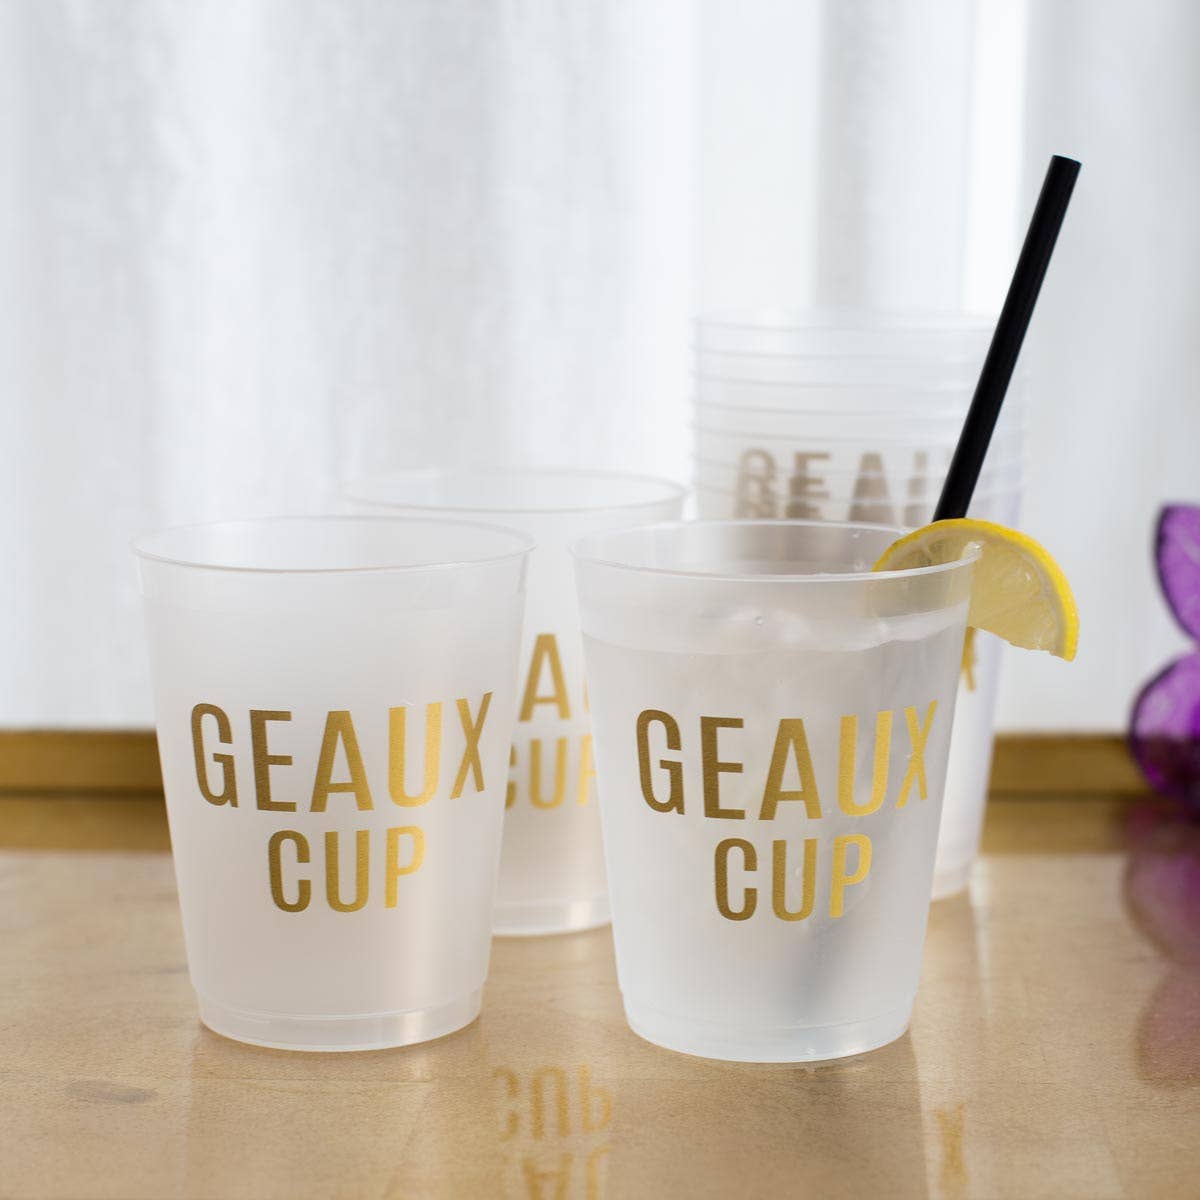 Geaux Cup Party Cups